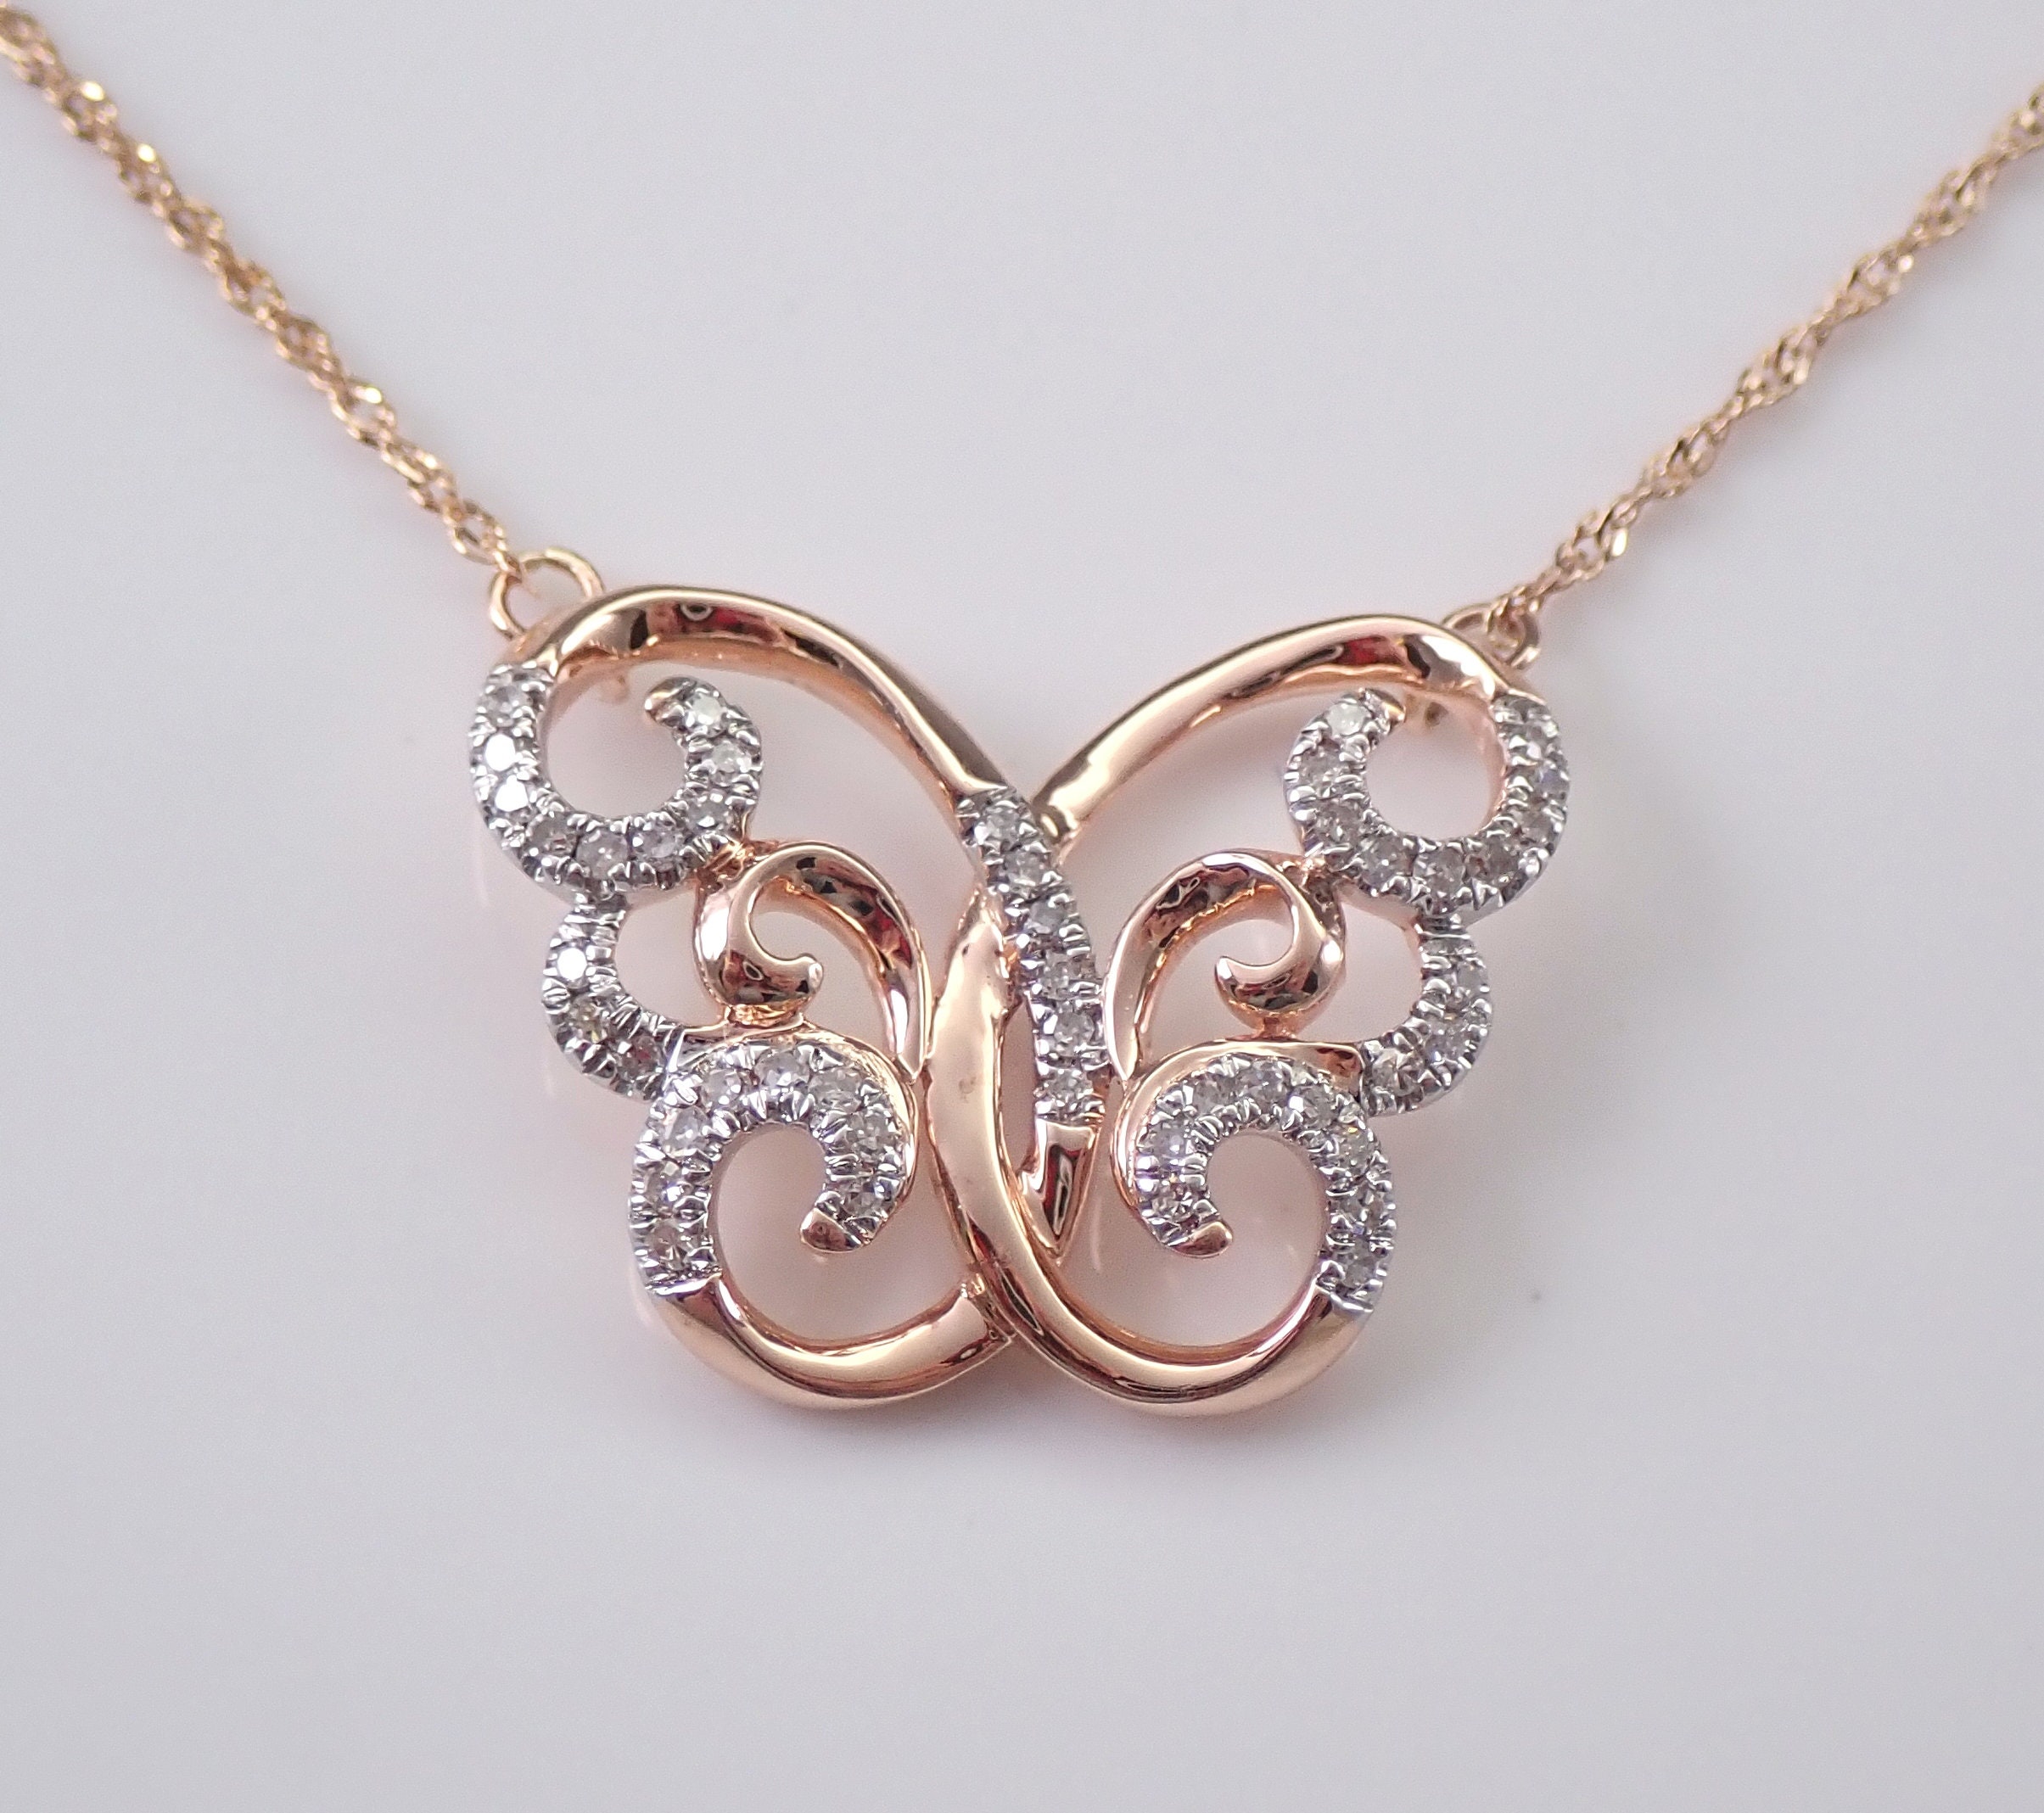 Rose Gold Diamond Butterfly Pendant Necklace 18 Chain Filigree Wedding Gift